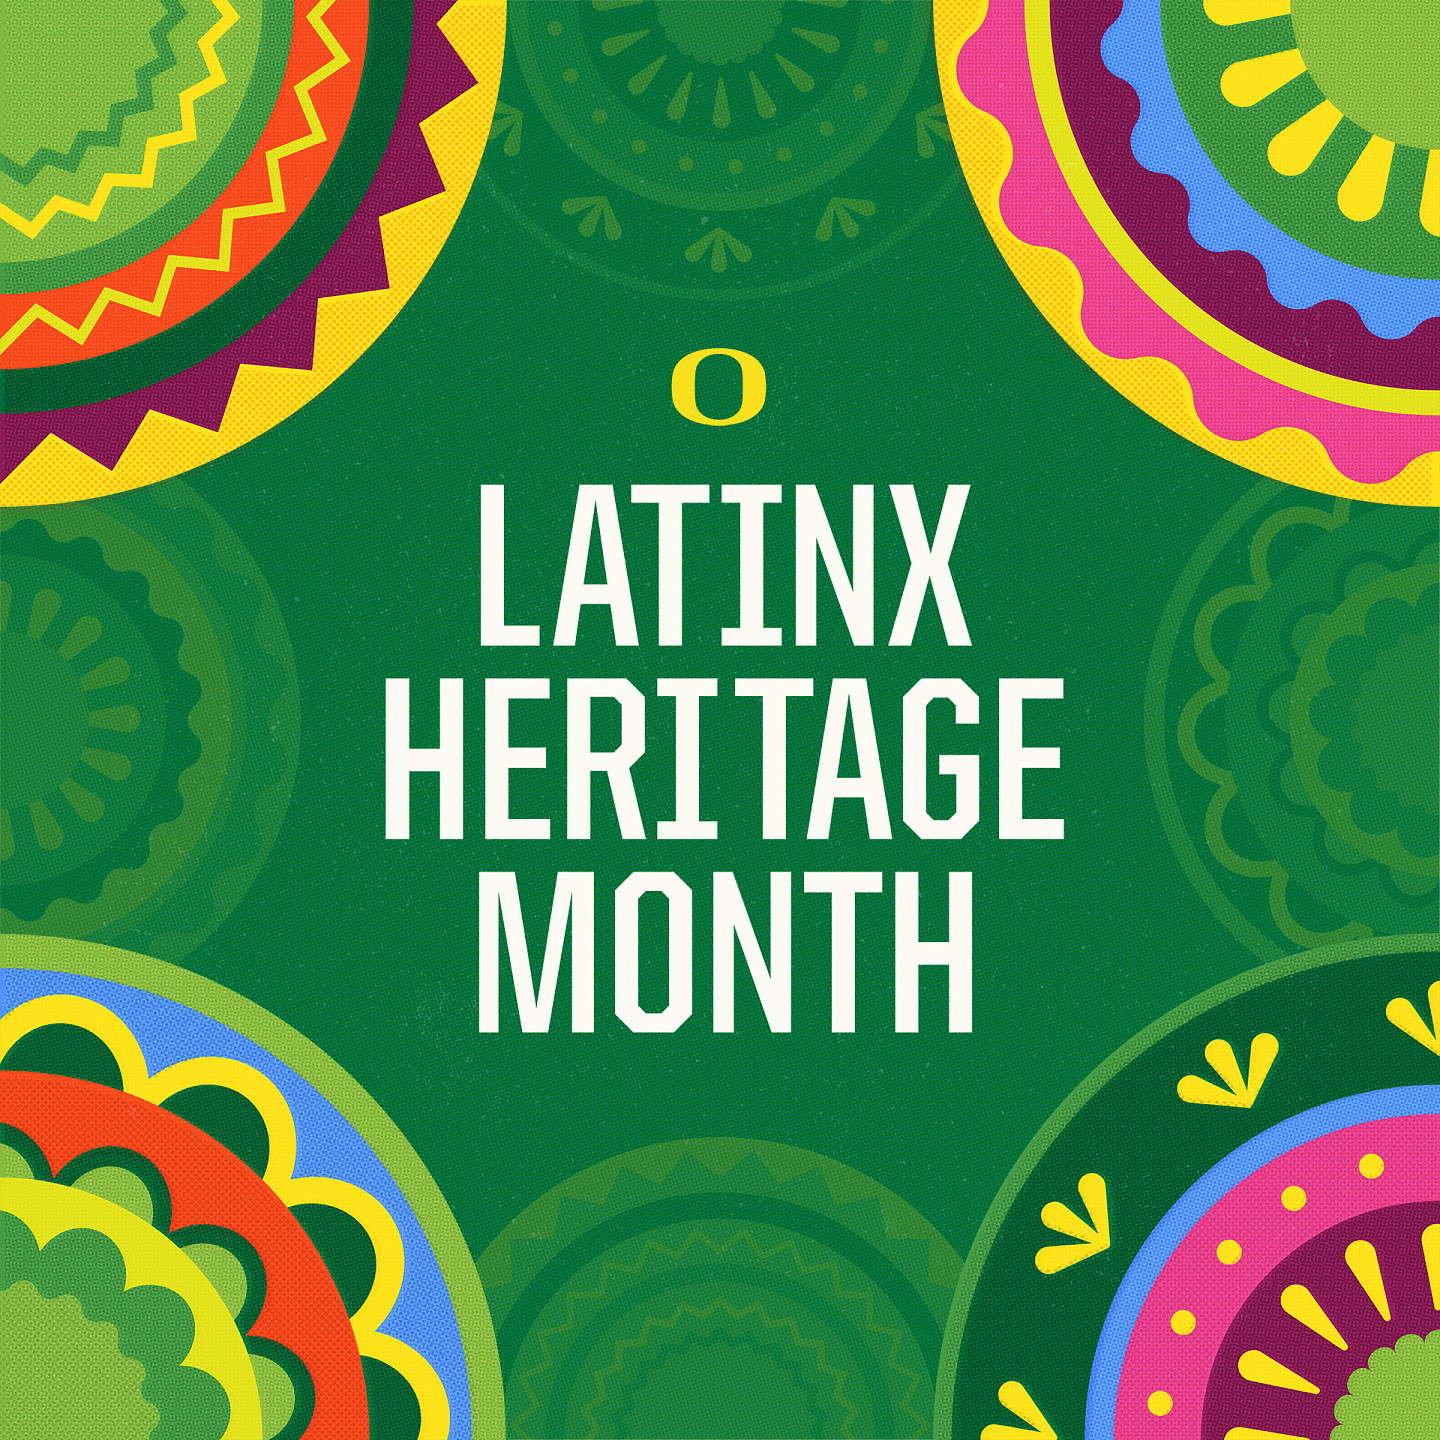 Graphical design announcing Latinx Heritage Month